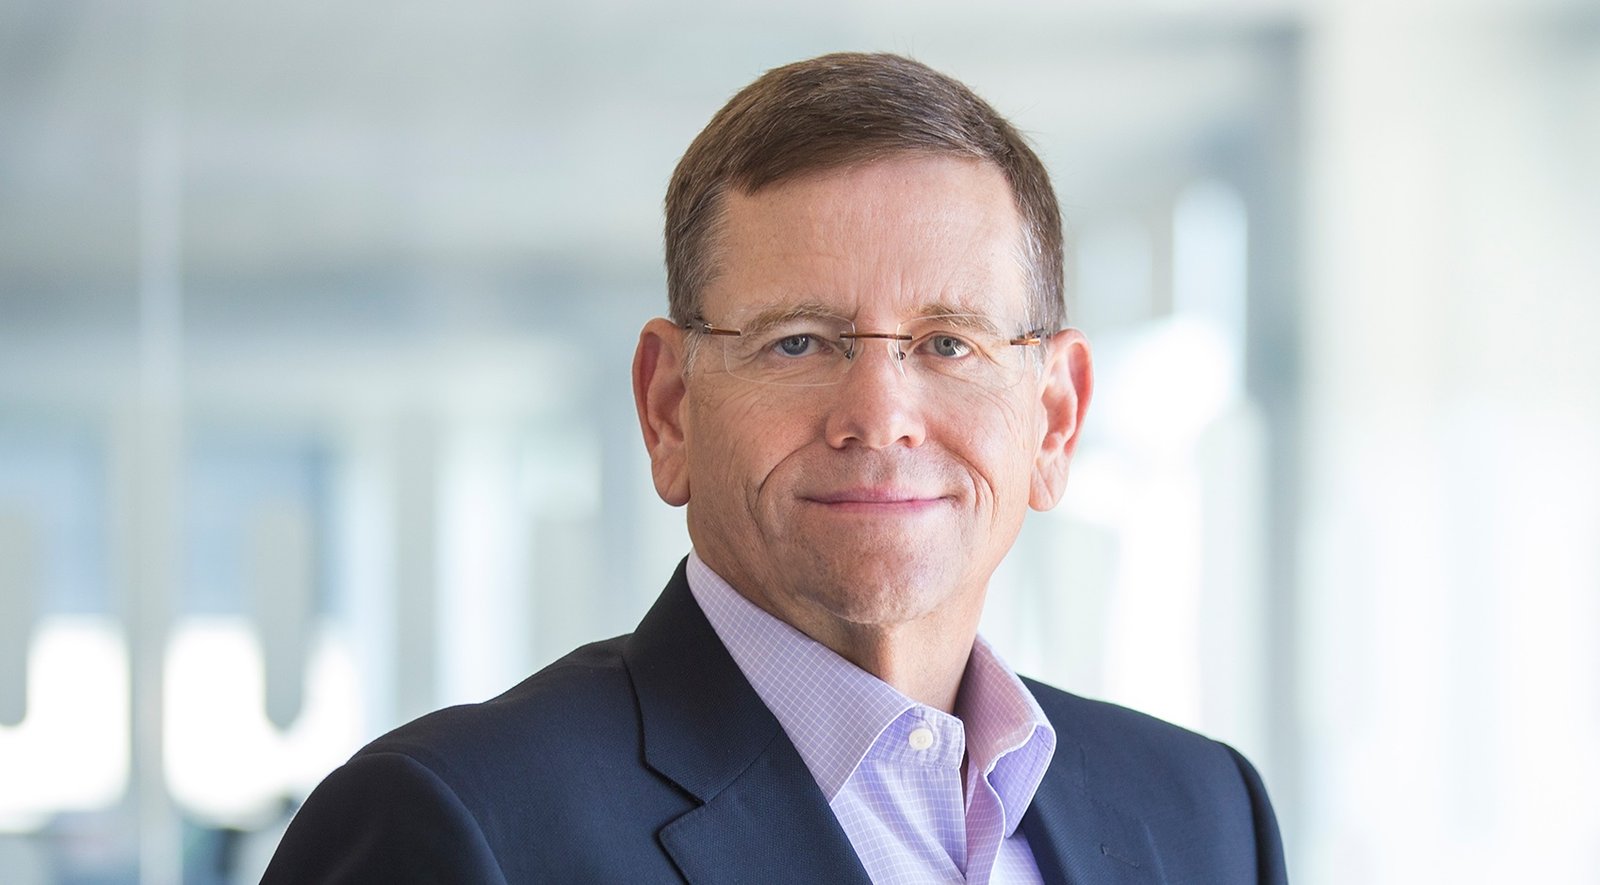 David Goeckeler joins as the new CEO for Western Digital